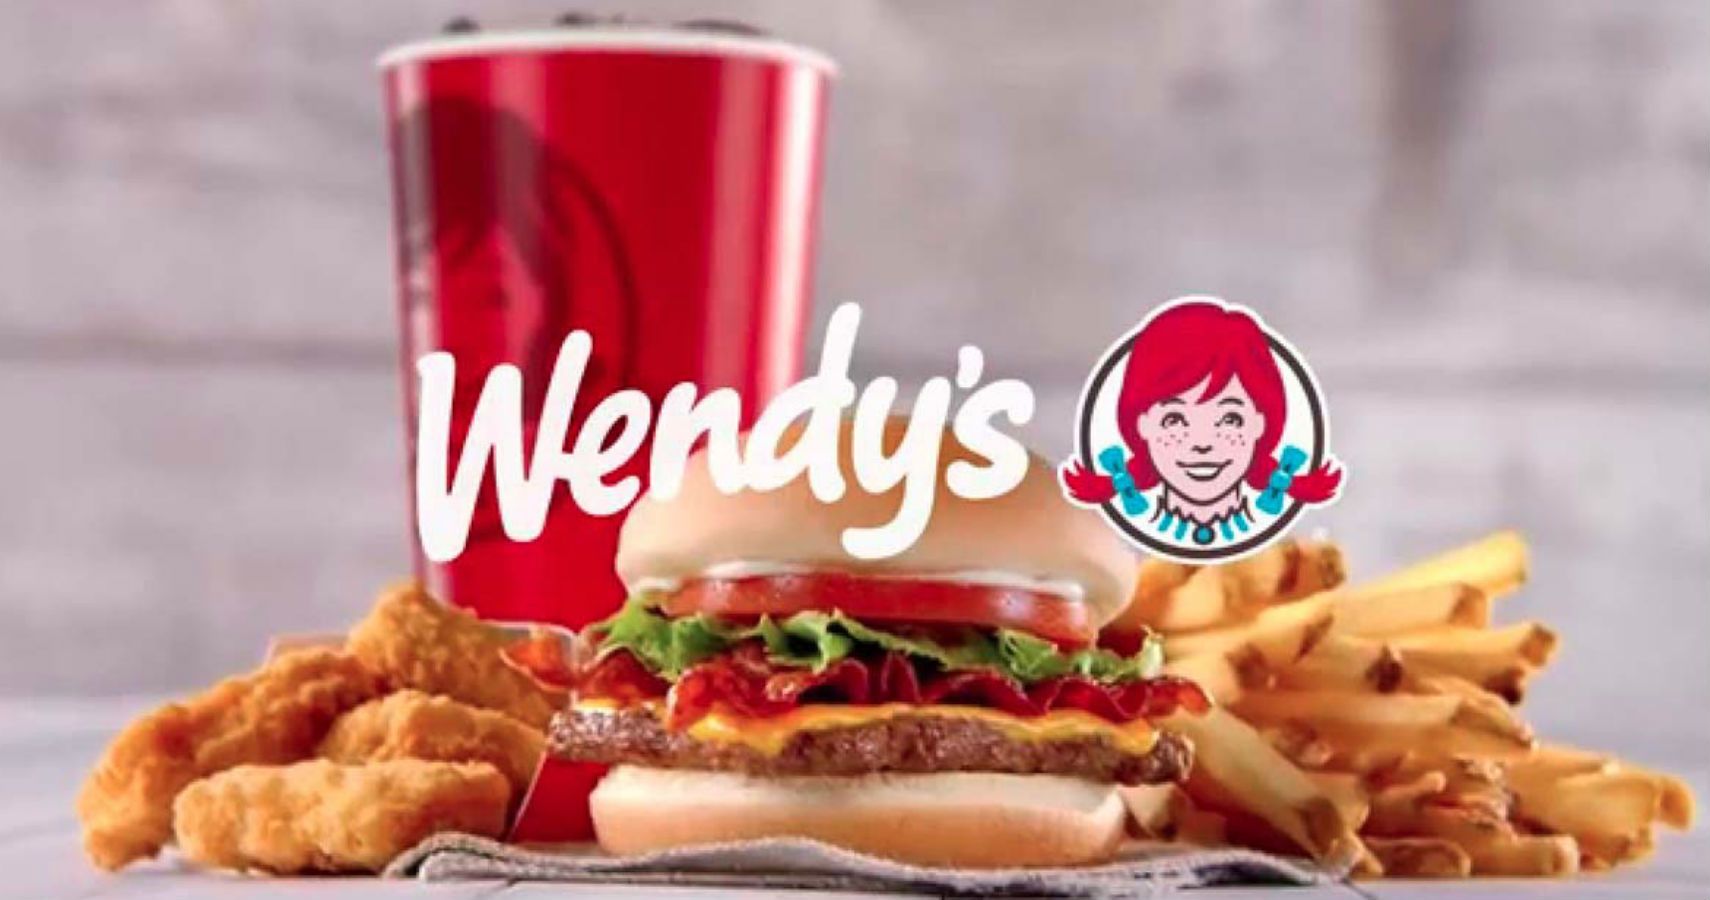 Wendy's Is Celebrating National Cheeseburger Day 2018 In The Best Way